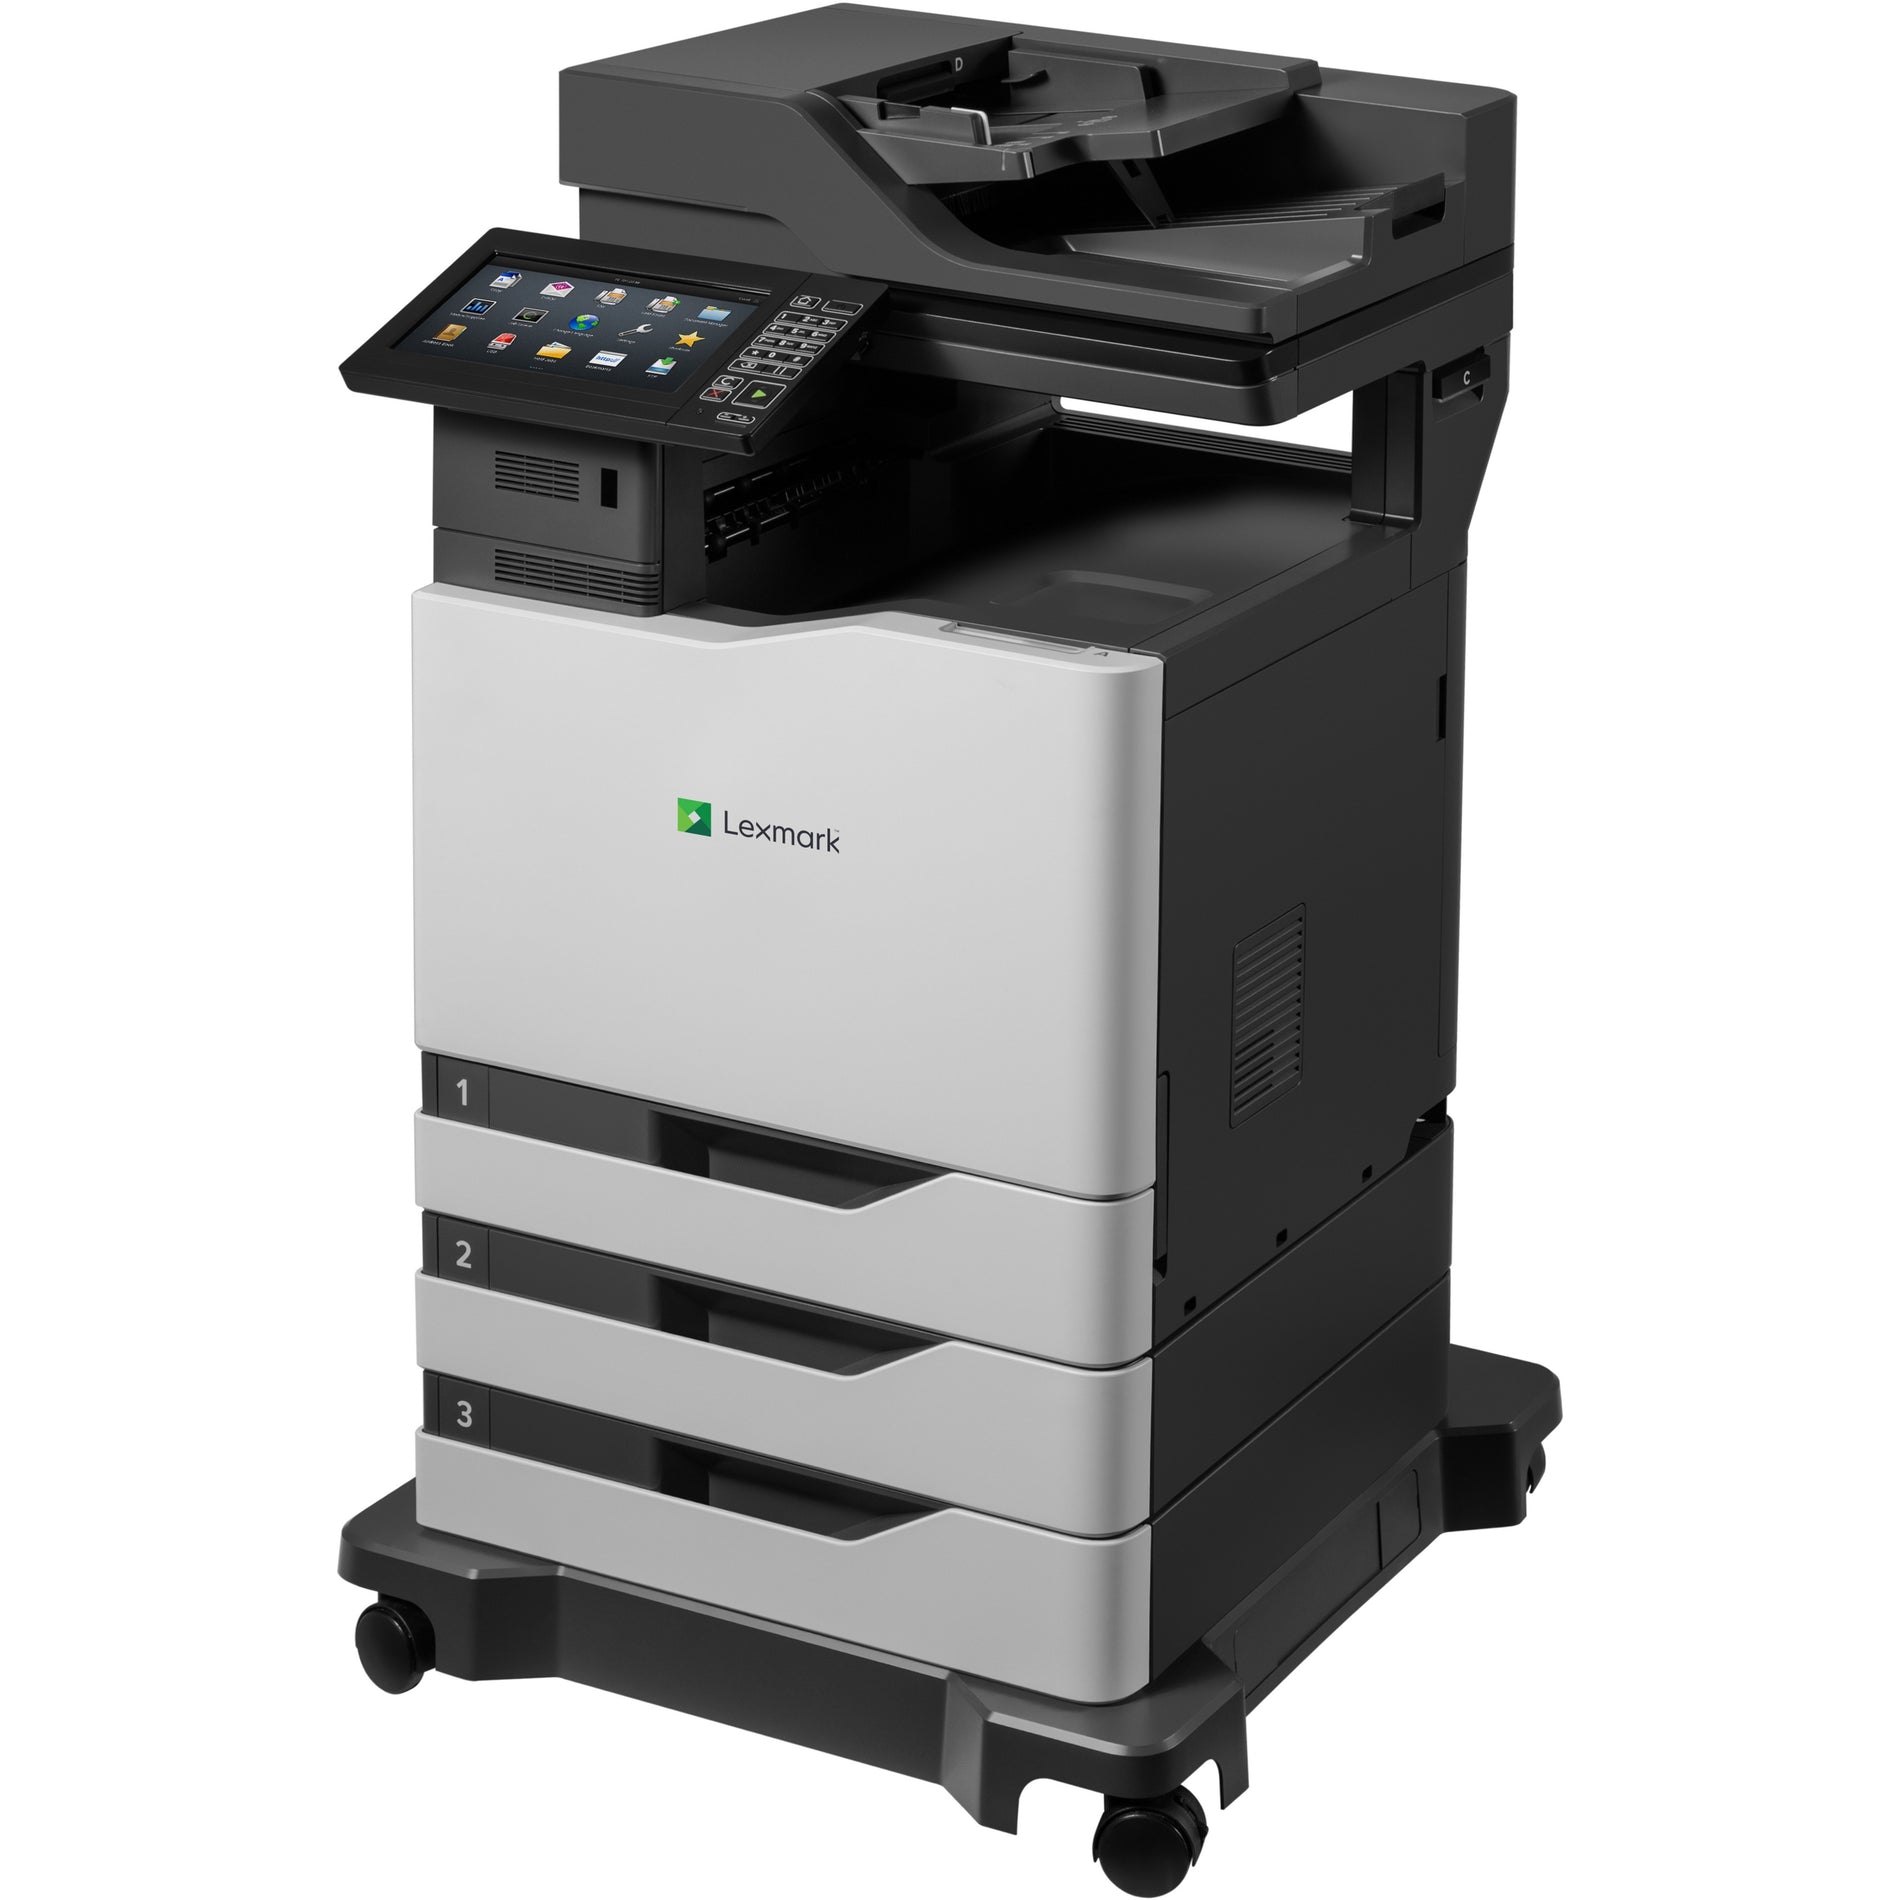 Lexmark 42KT251 CX825dte Laser Multifunction Printer, Color, Flatbed, 1 Year Warranty, 250,000 Duty Cycle, TAA Compliant, Energy Star, USB, AC Supply, 230V AC, 10" Touchscreen